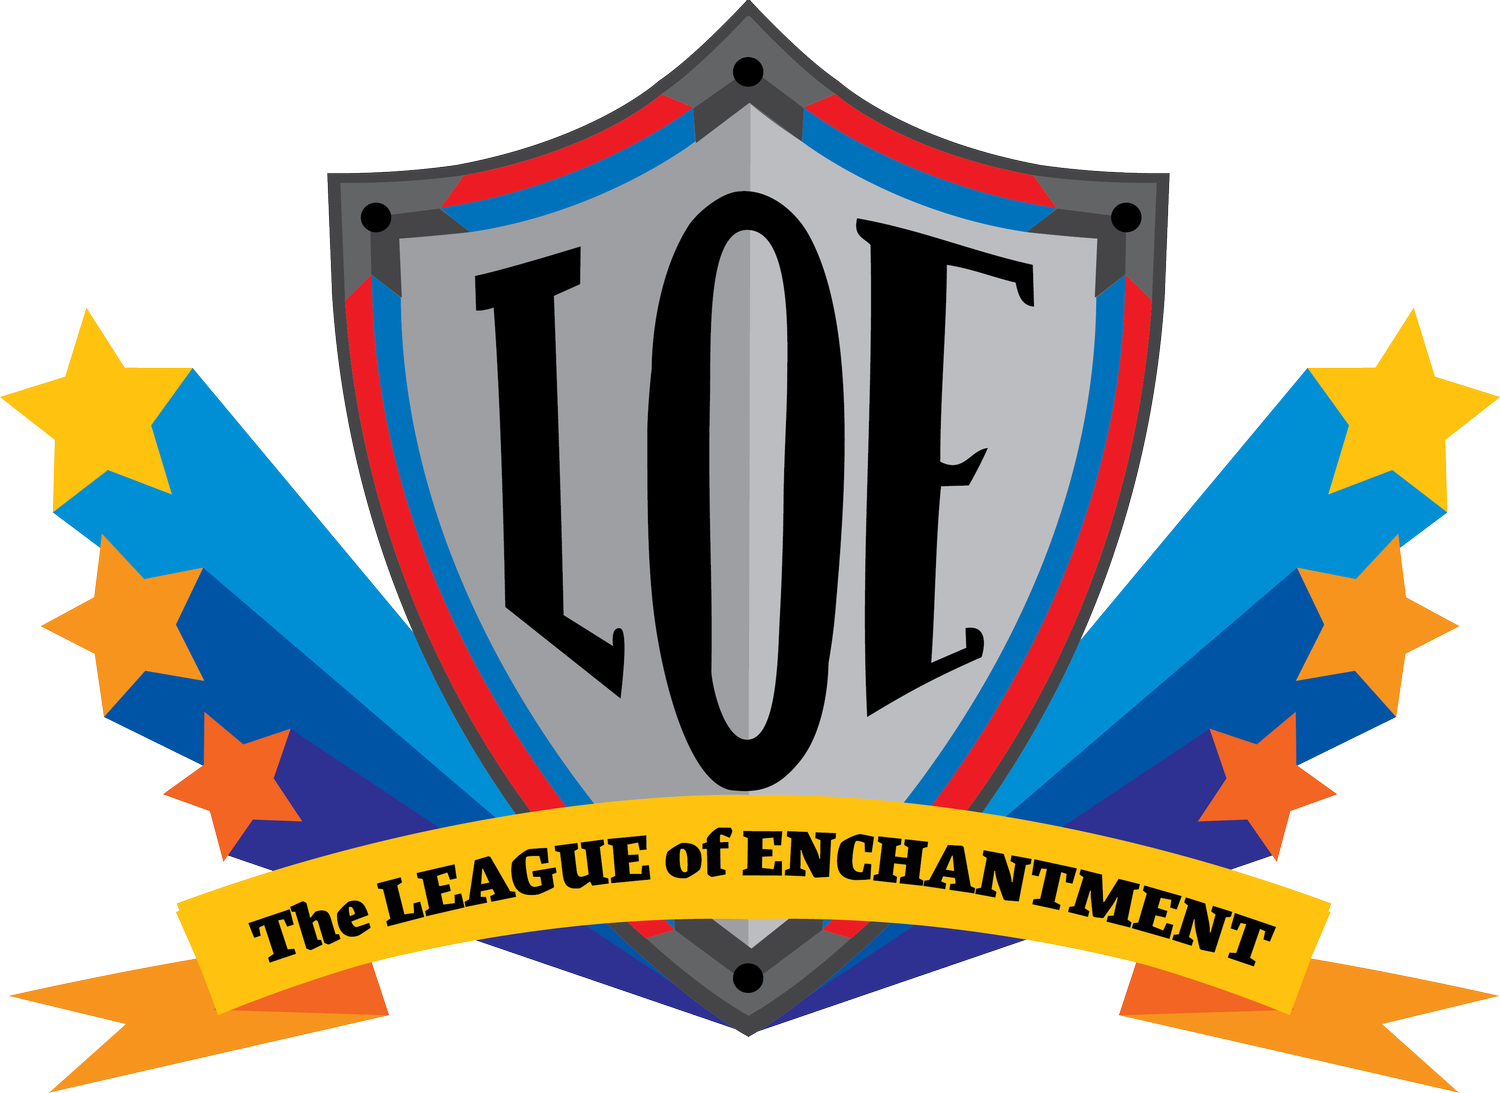 The League of Enchantment